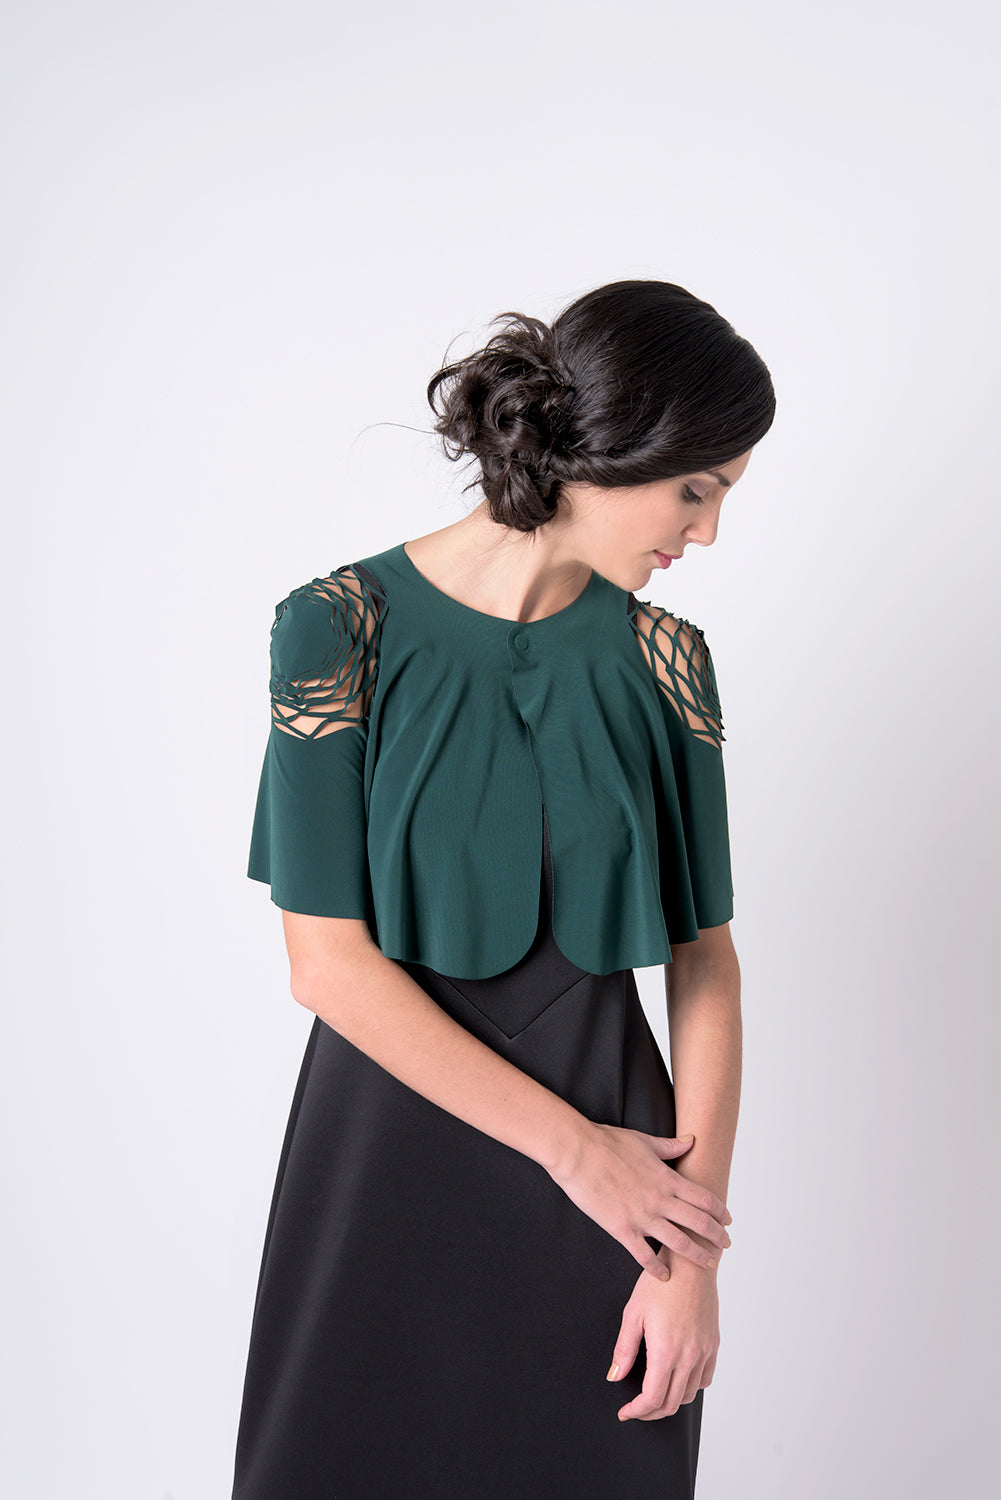 Green top for the event with a hexagonal cut on the shoulders - Delta top